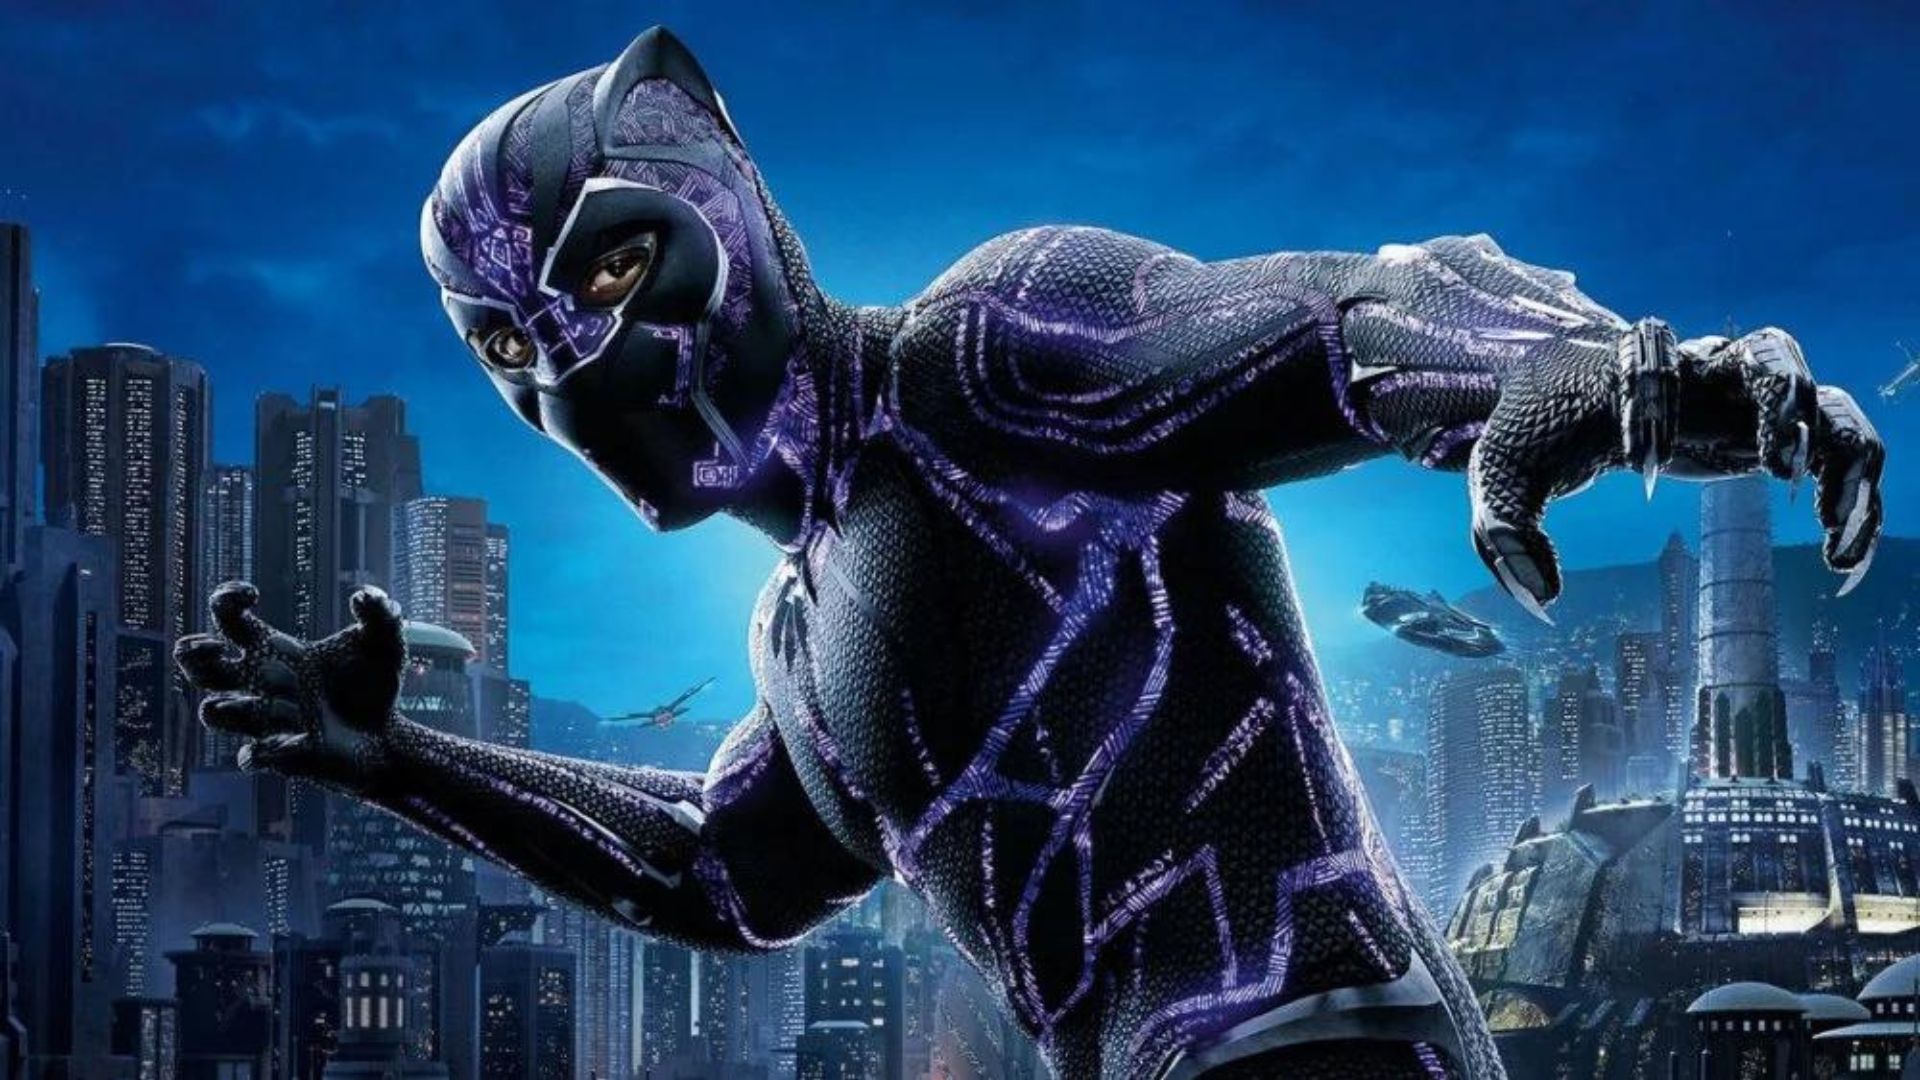 Black Panther game release date speculation, developer, features